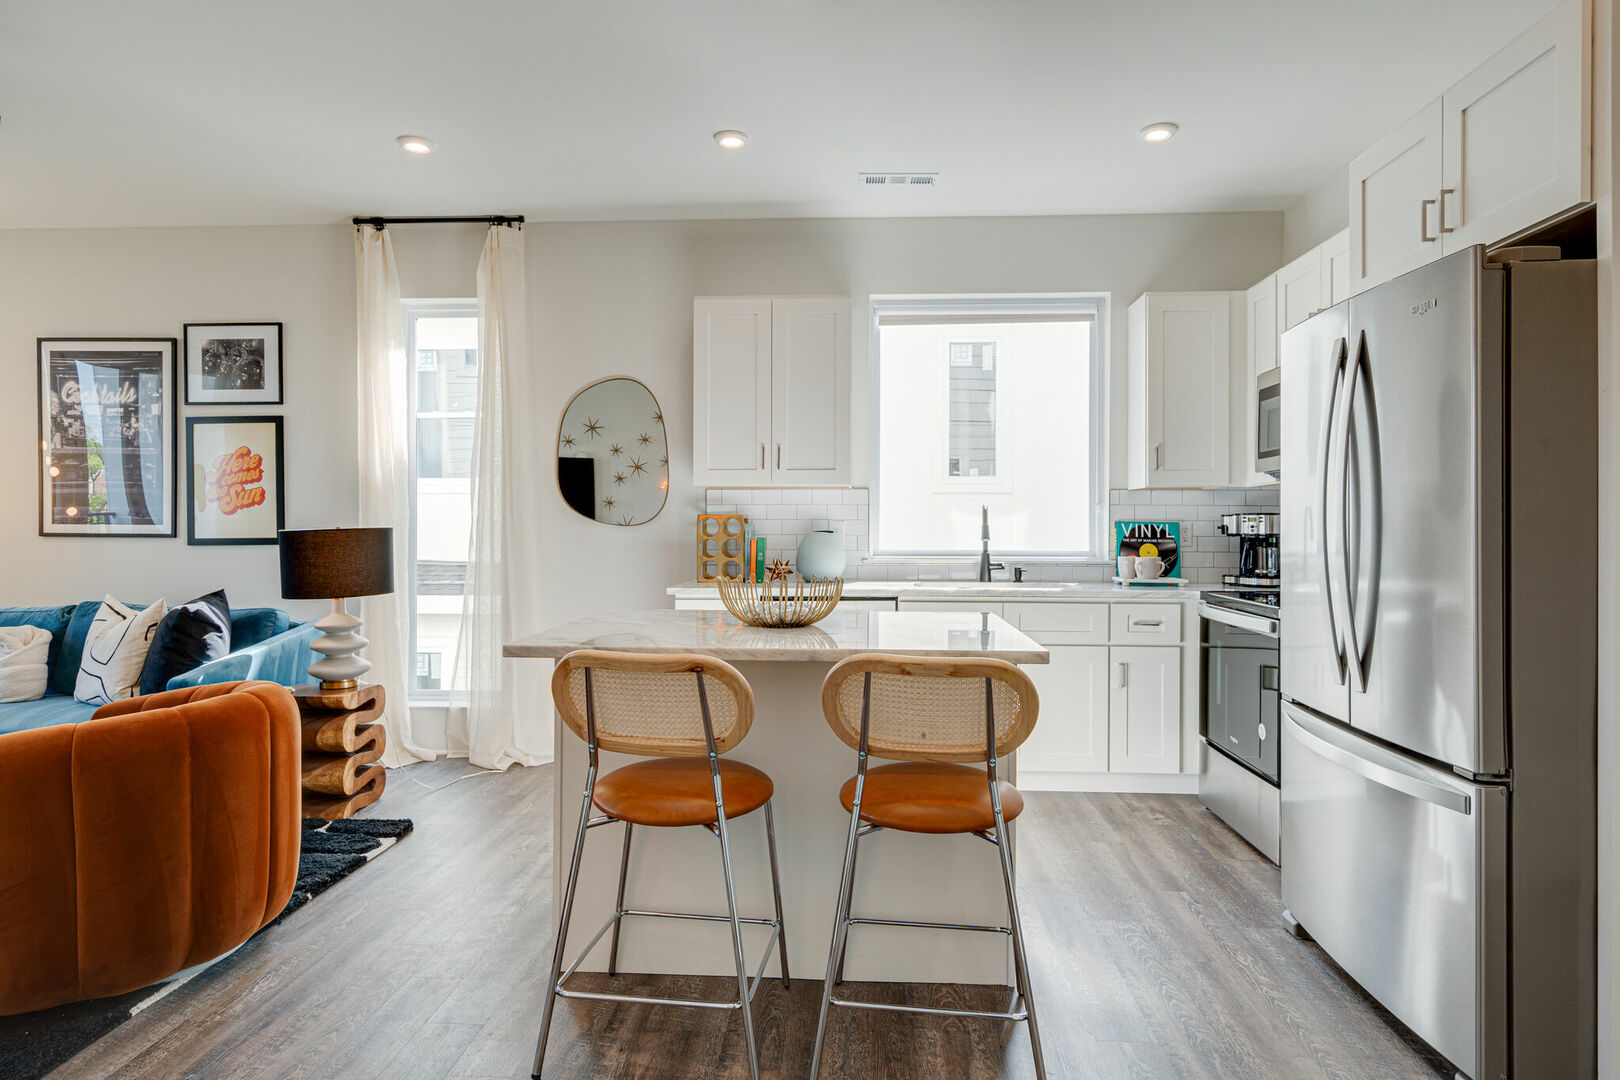 1st Unit, 2nd Floor: Bright and open kitchen equipped with stainless steel appliances and is fully stocked with your basic cooking essentials. Features breakfast bar seating and connects to living space.